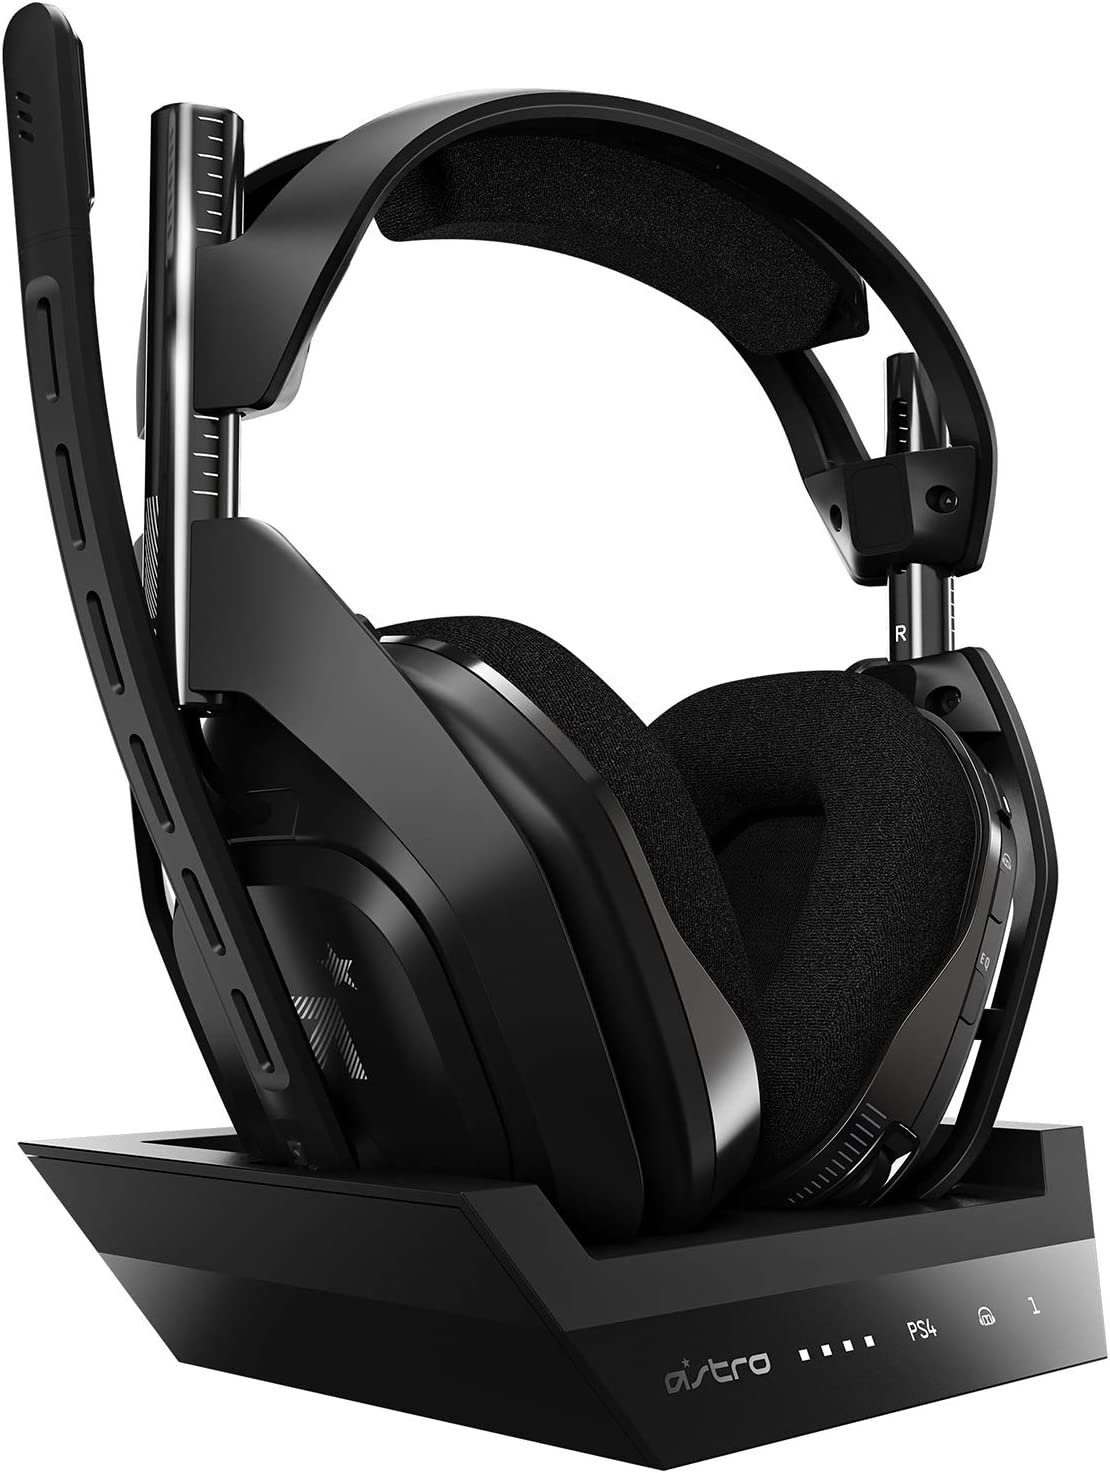 Gamingheadsets online kaufen » | Headsets Gamer OTTO